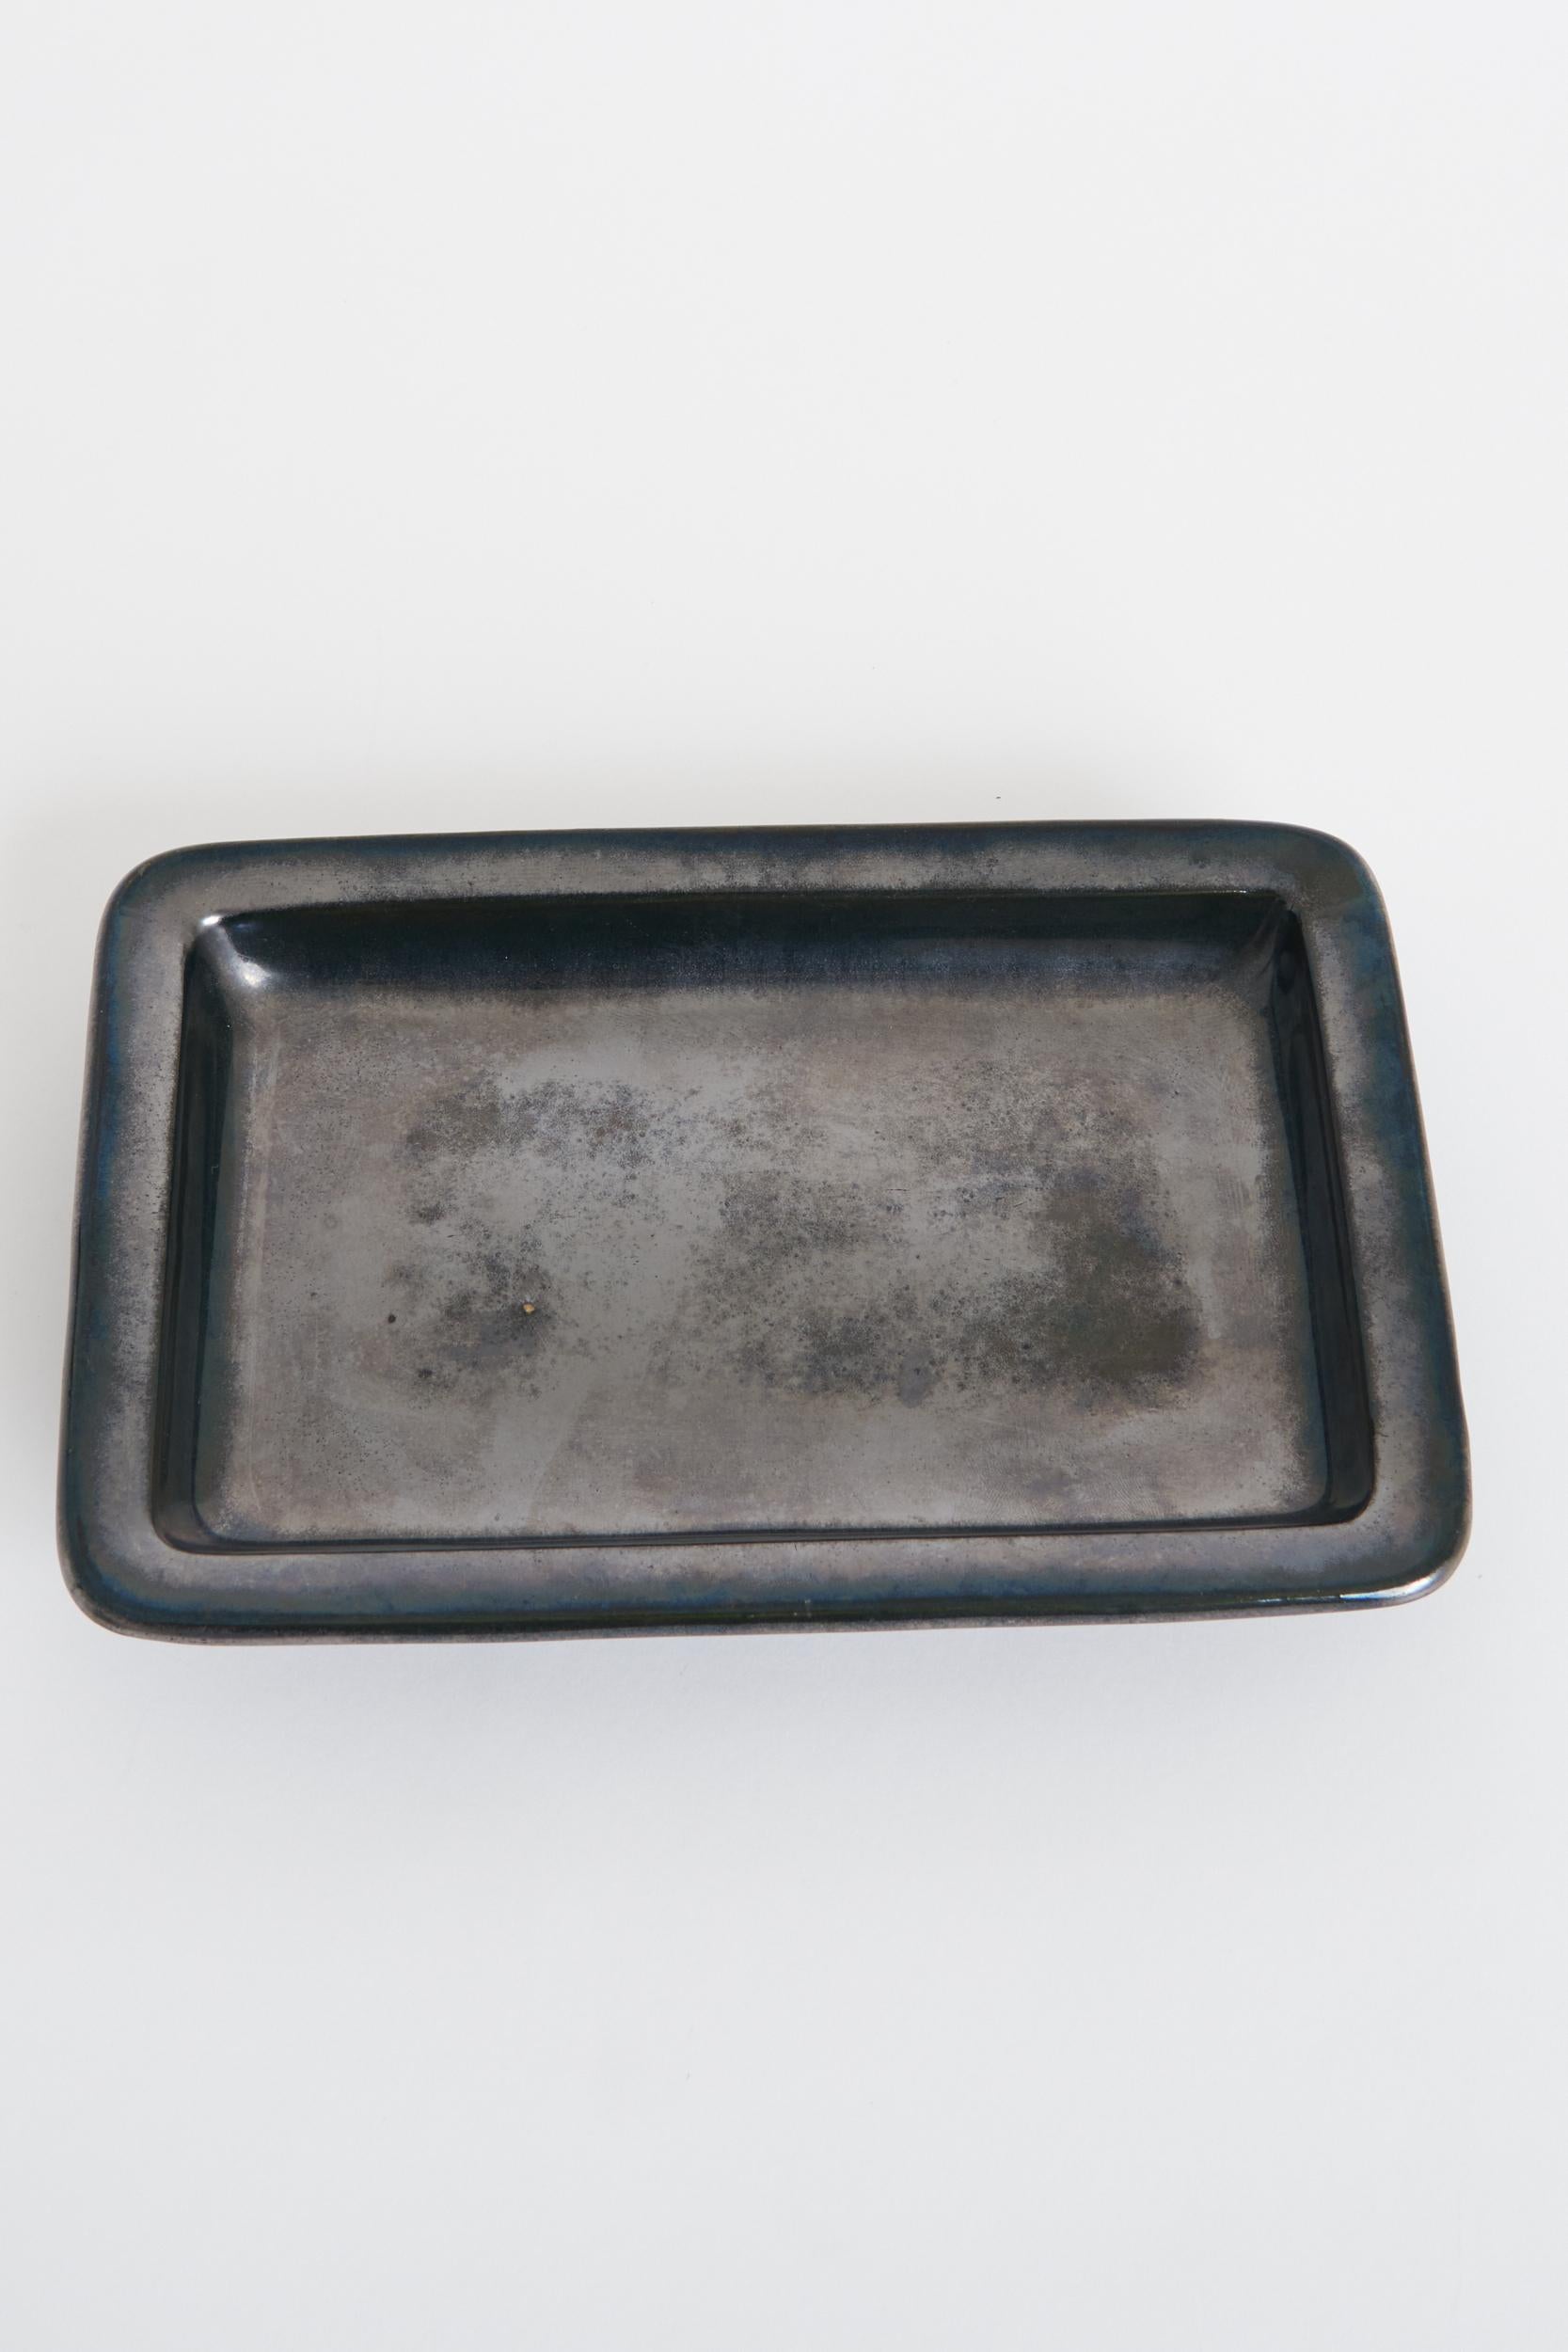 French Black Ceramic Bowl by Lifas